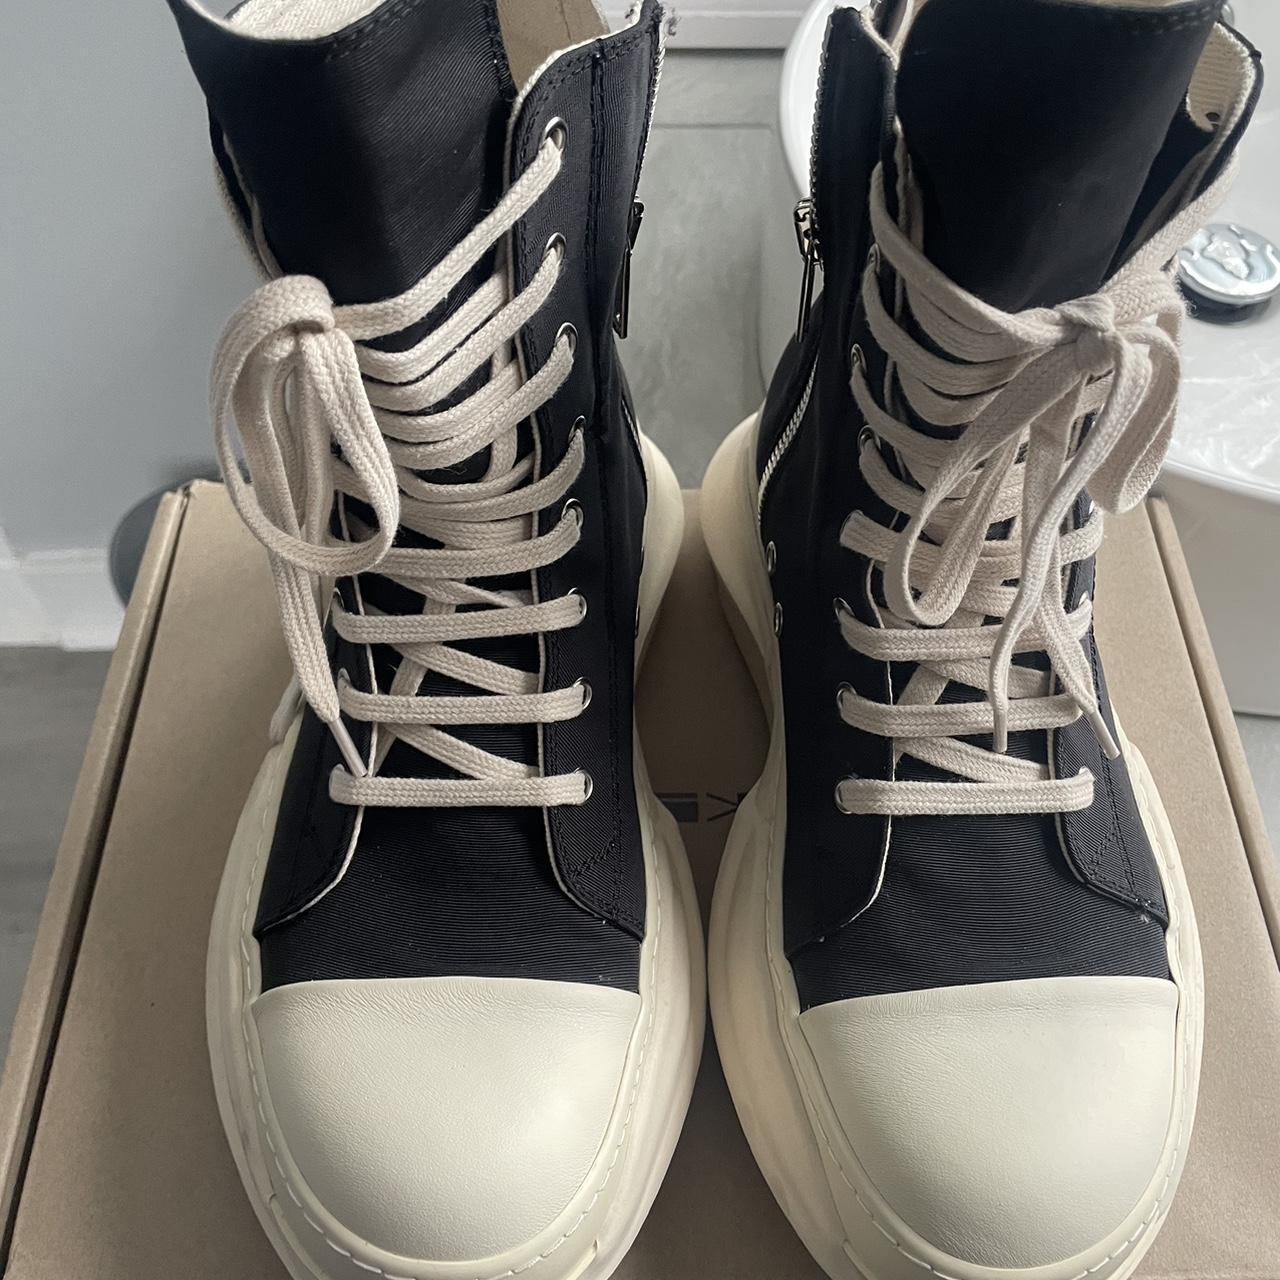 Rick Owens DRKSHDW Abstracts • Worn Once • Price... - Depop